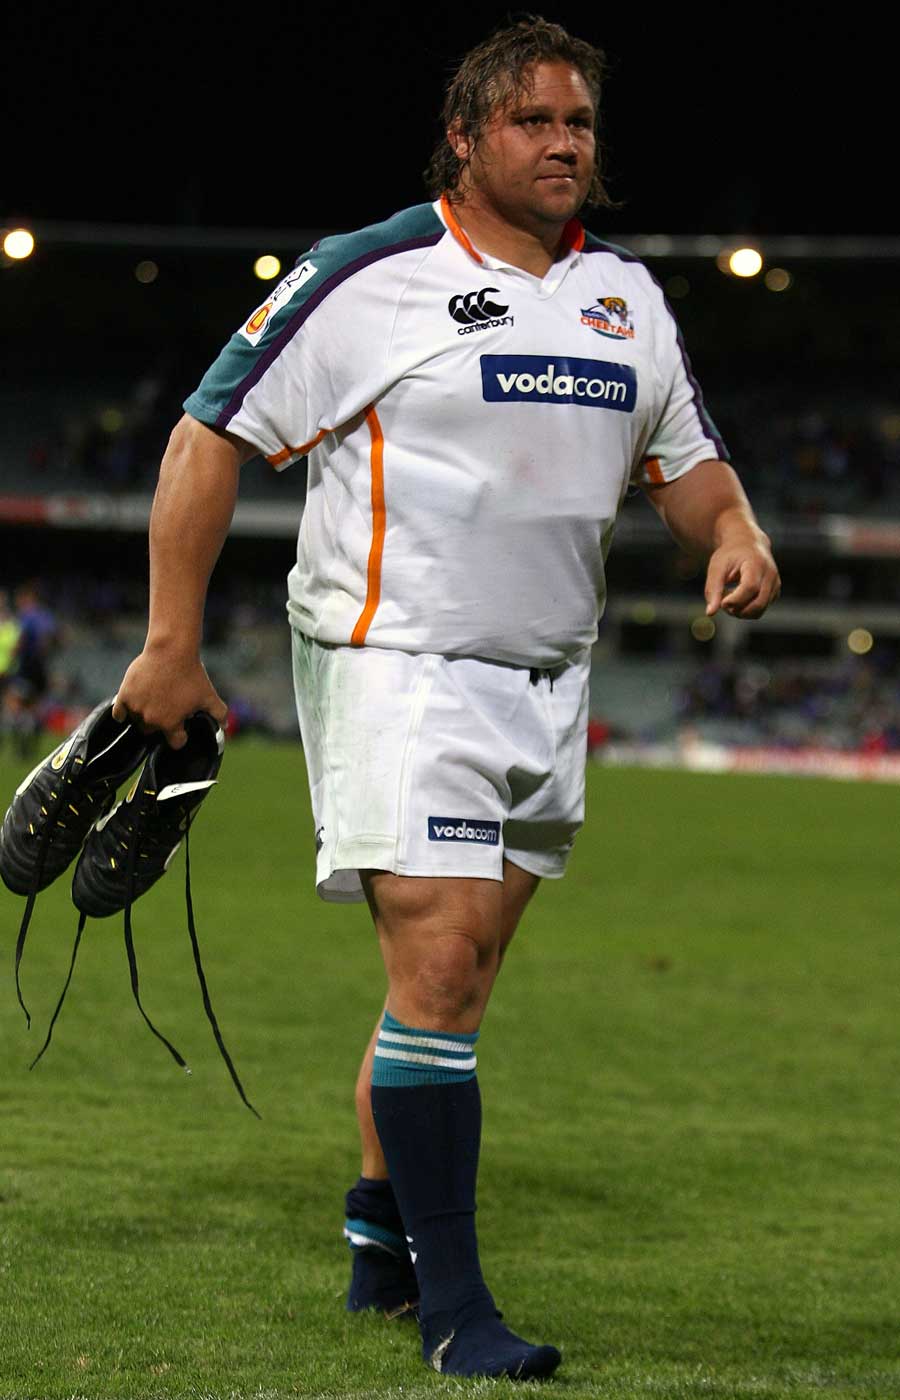 The Cheetahs' Ollie Le Roux leaves the field